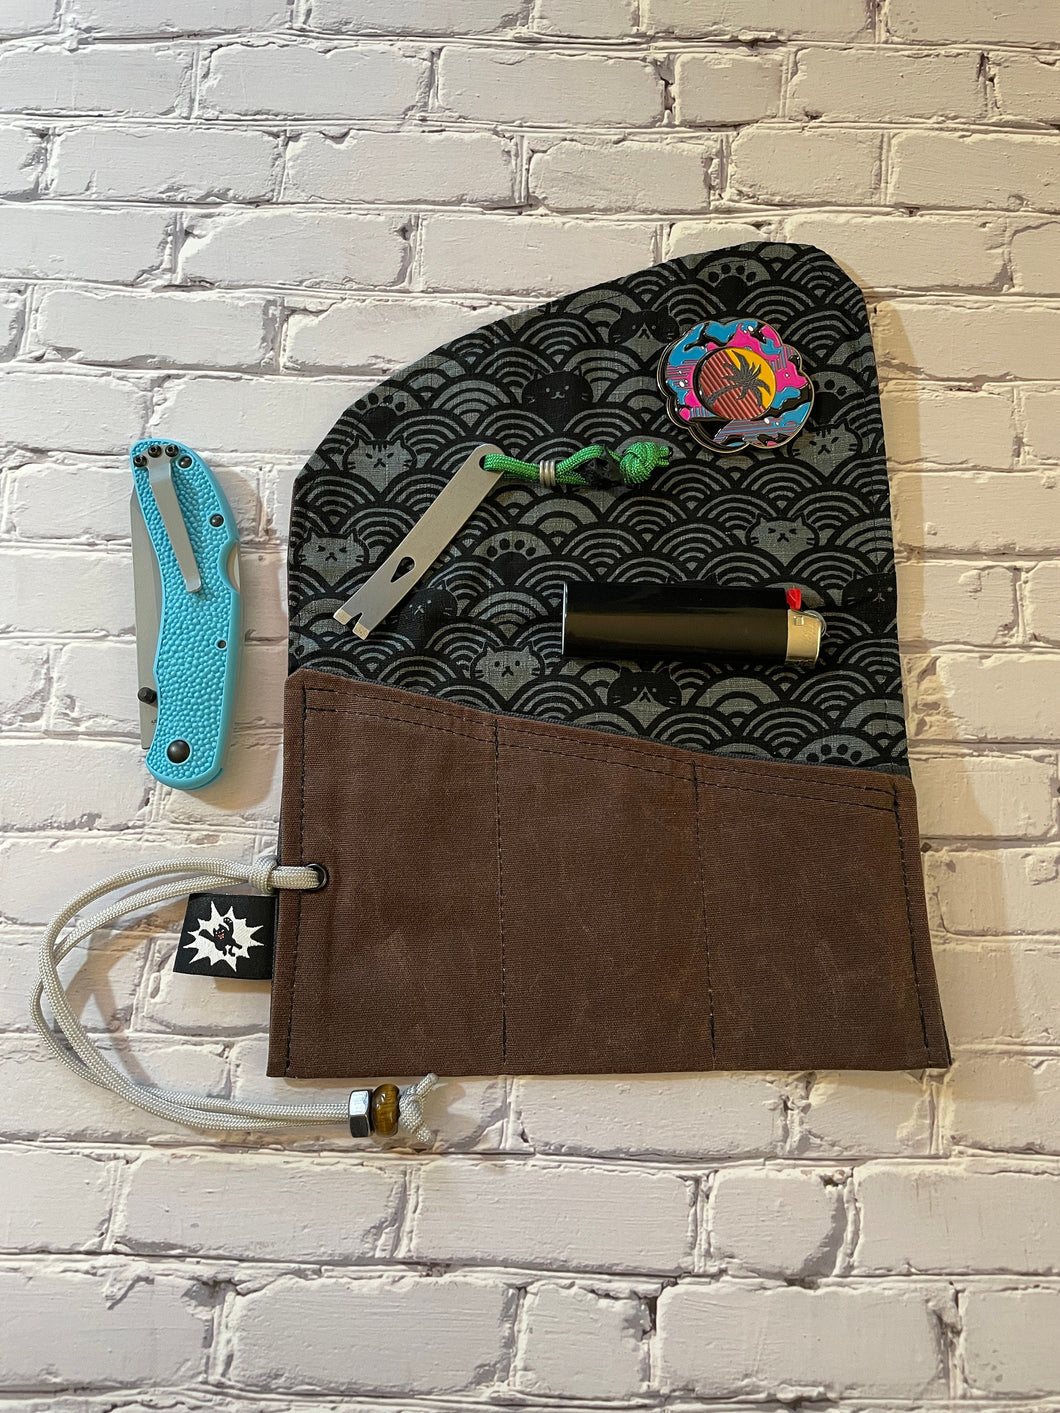 EDC Tool Roll | Waxed Canvas Tool Pouch | Every Day Carry Gear Bag | Pocket Organizer | Knife Roll | Pocket Dump Display Hank |Grey cat wave